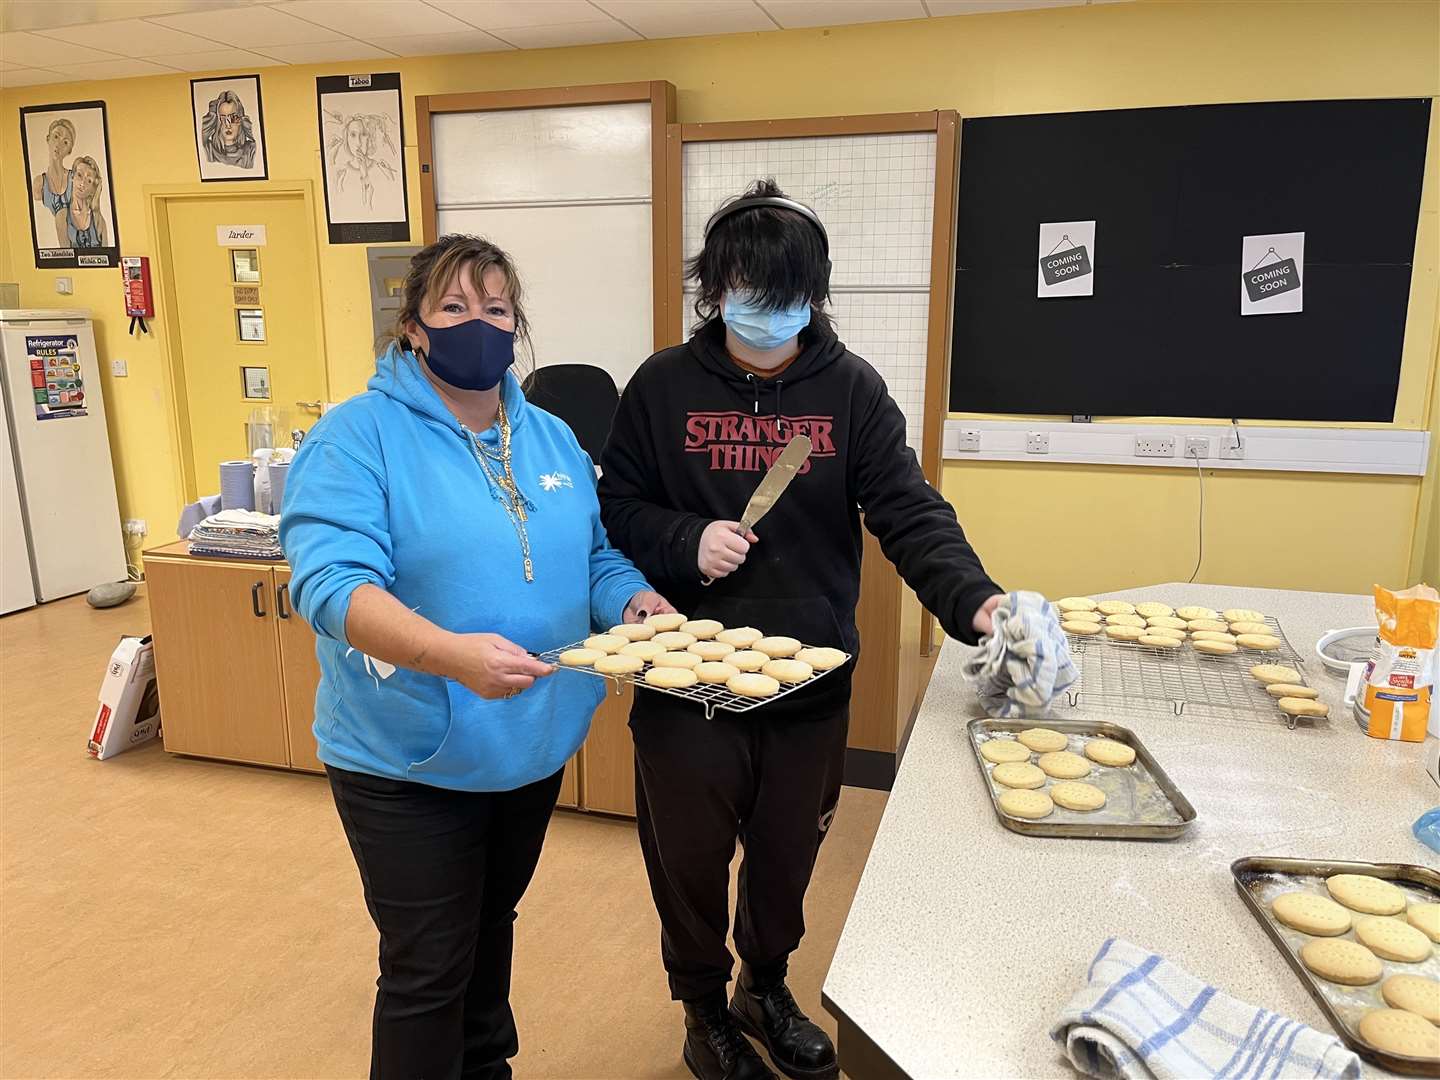 Wanda Mackay, Youth Development Manager, High Life Highland, with Ethan Paterson at a Fortrose Academy baking event.